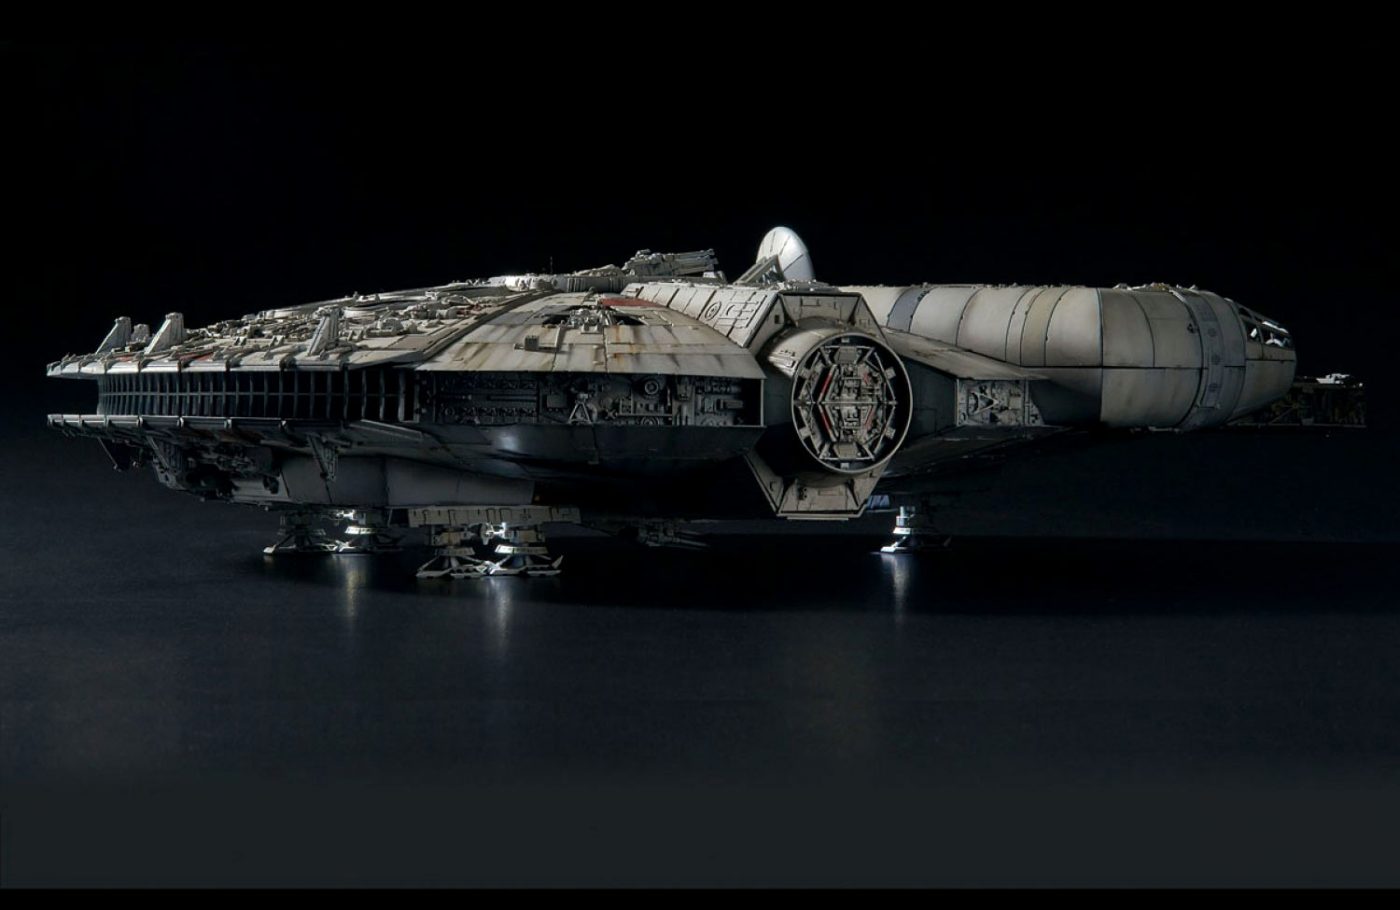 A Star Wars gift you can't go wrong with: Bandai models and kits